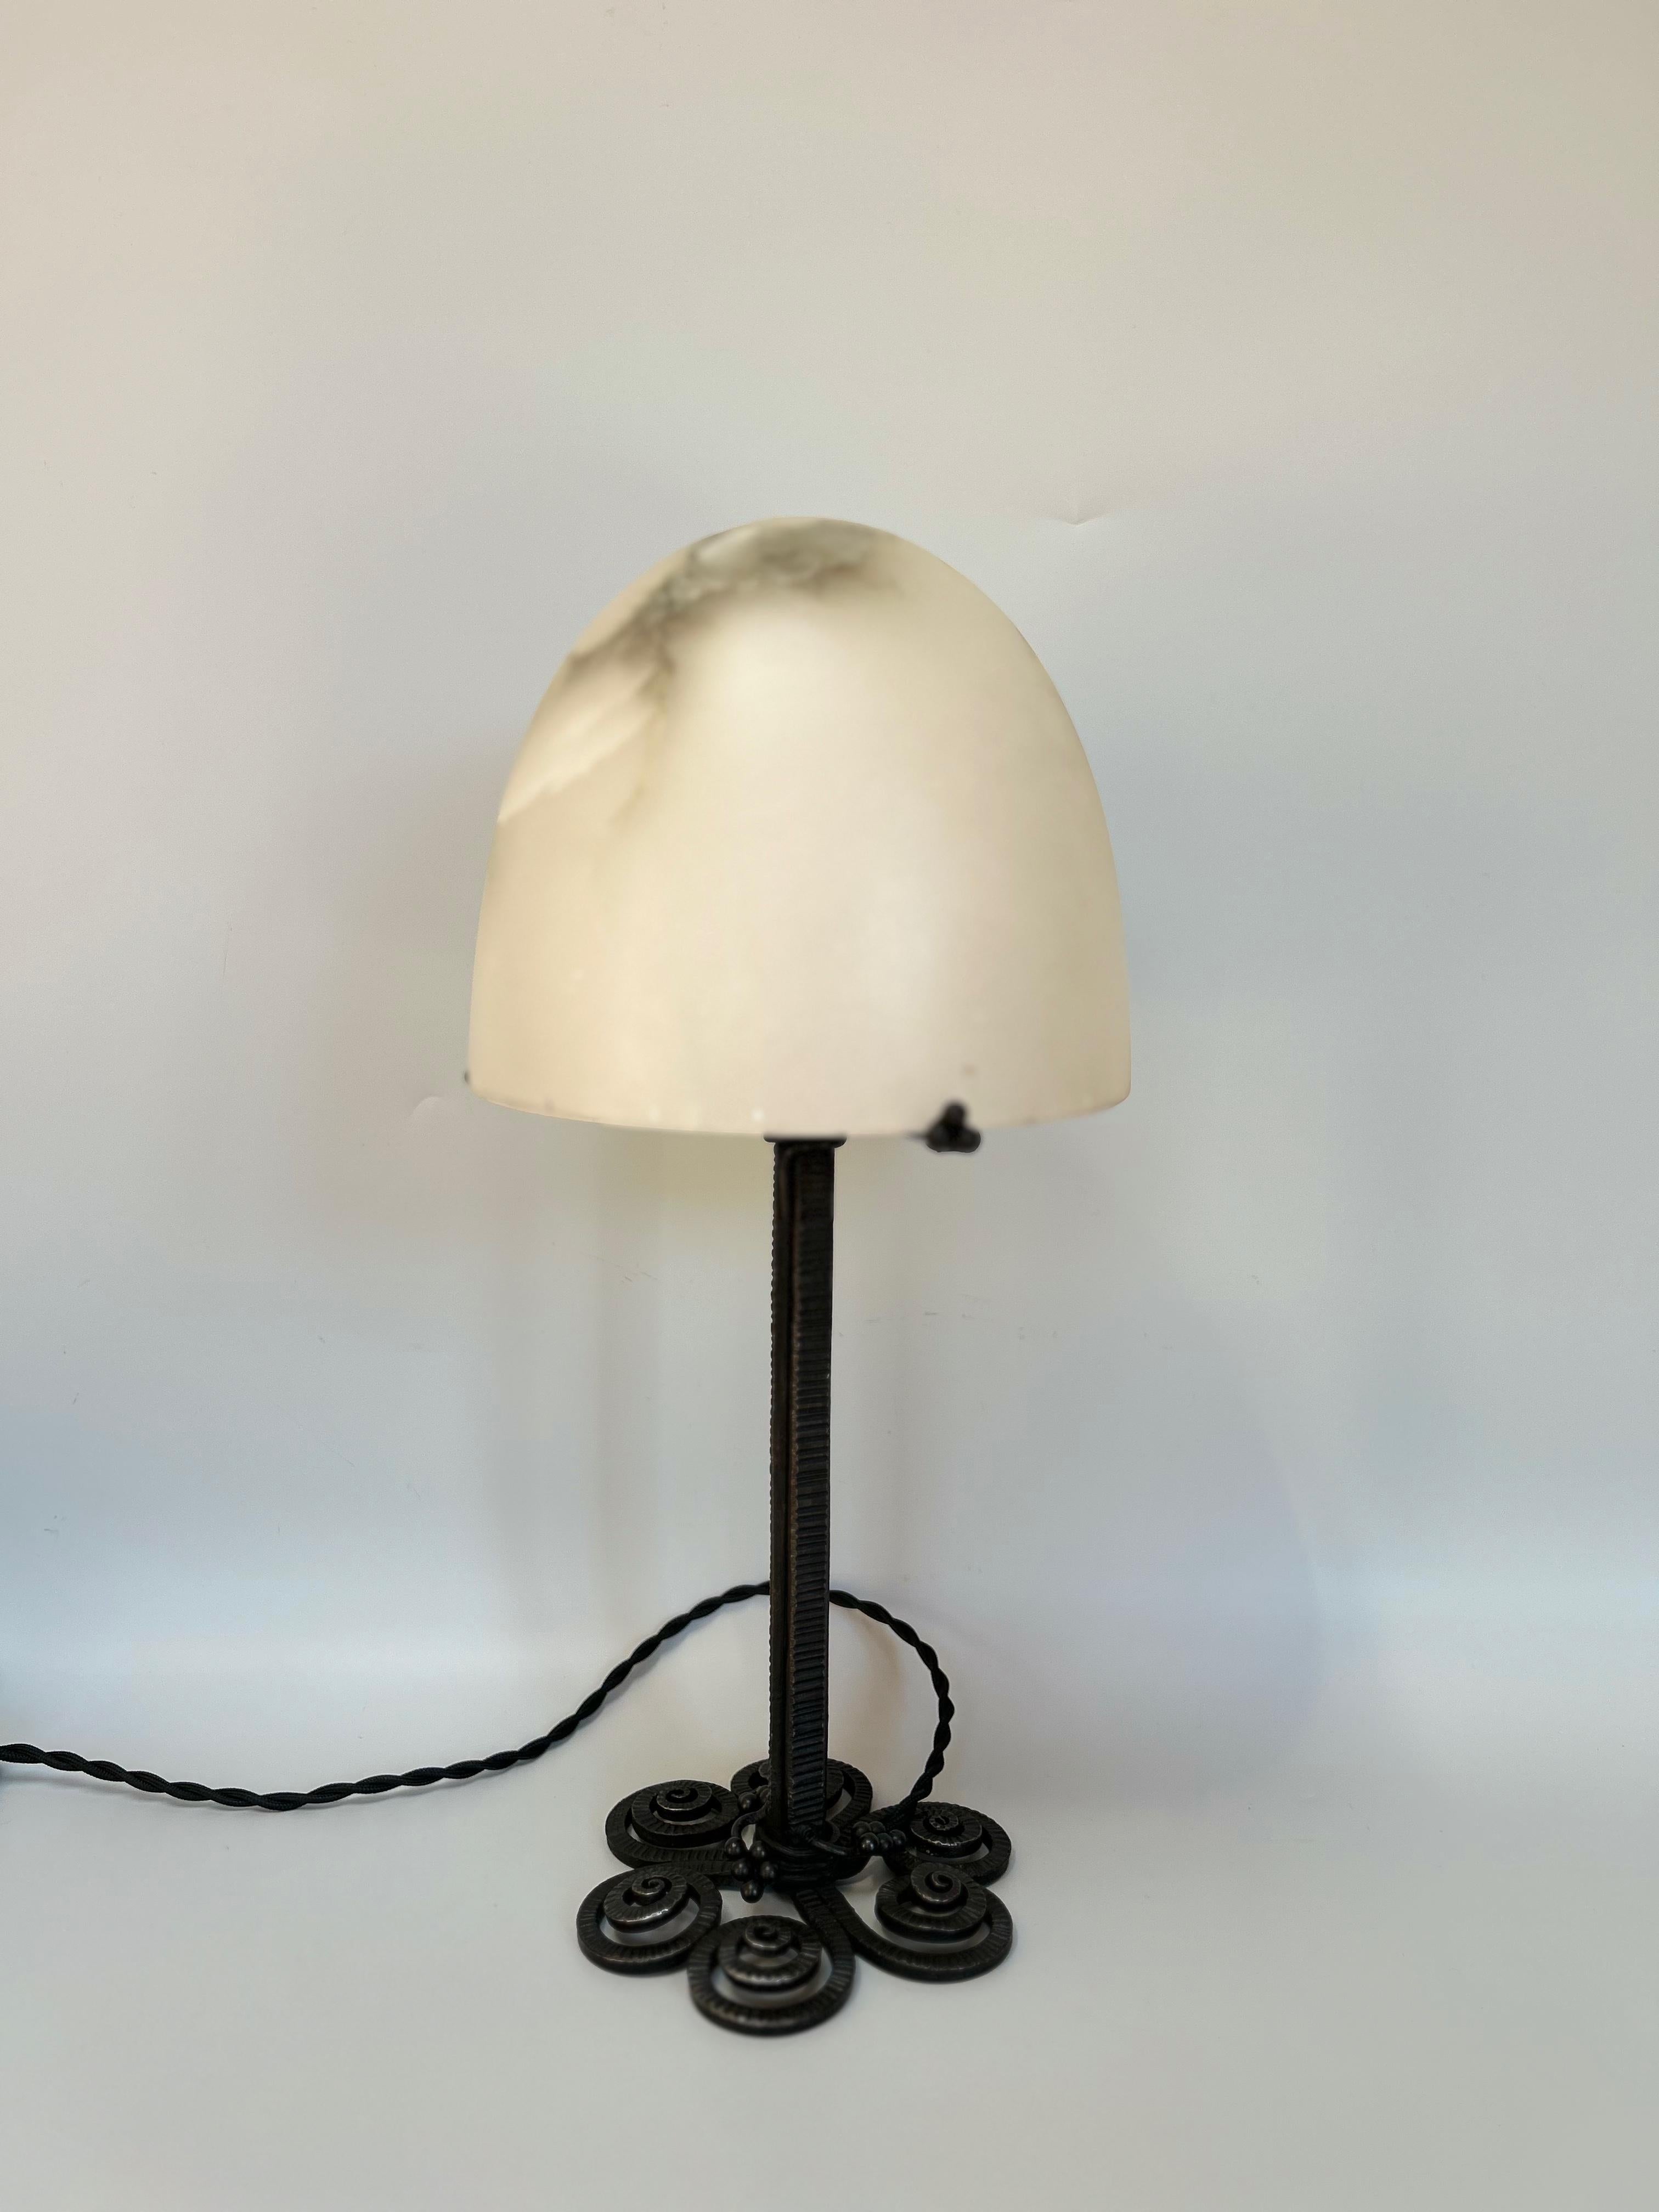 Art deco lamp circa 1925 wrought iron foot stamped E.Brandt. 
Alabaster shell. 
The lamp is electrified and in perfect condition.

Diameter: base 15 cm obus 20 cm
Height: 43 cm
Weight: 3 Kg

Edgar Brandt was born in Paris in 1880 and studied at the